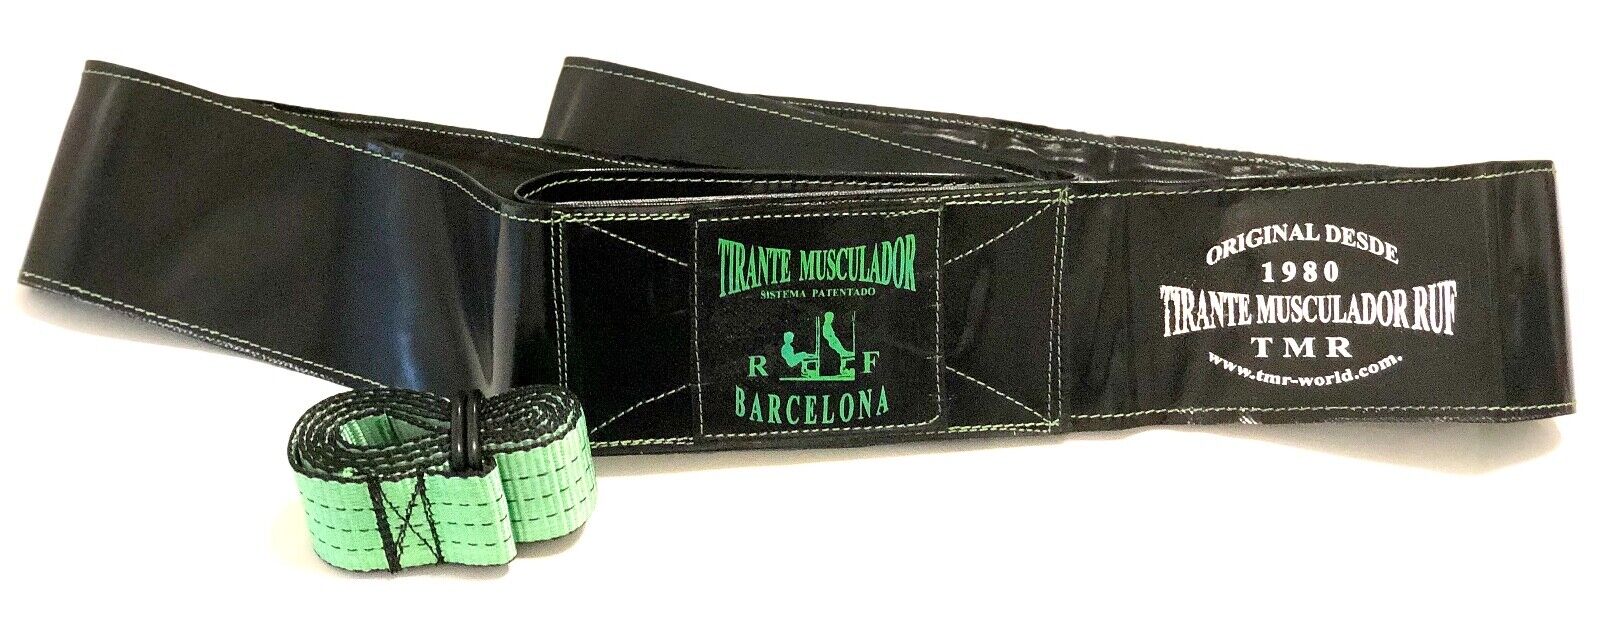 Tmr Pro Home 3 Black Green Belt Musculador Russian - Al Discount is also underway sold out. Strap